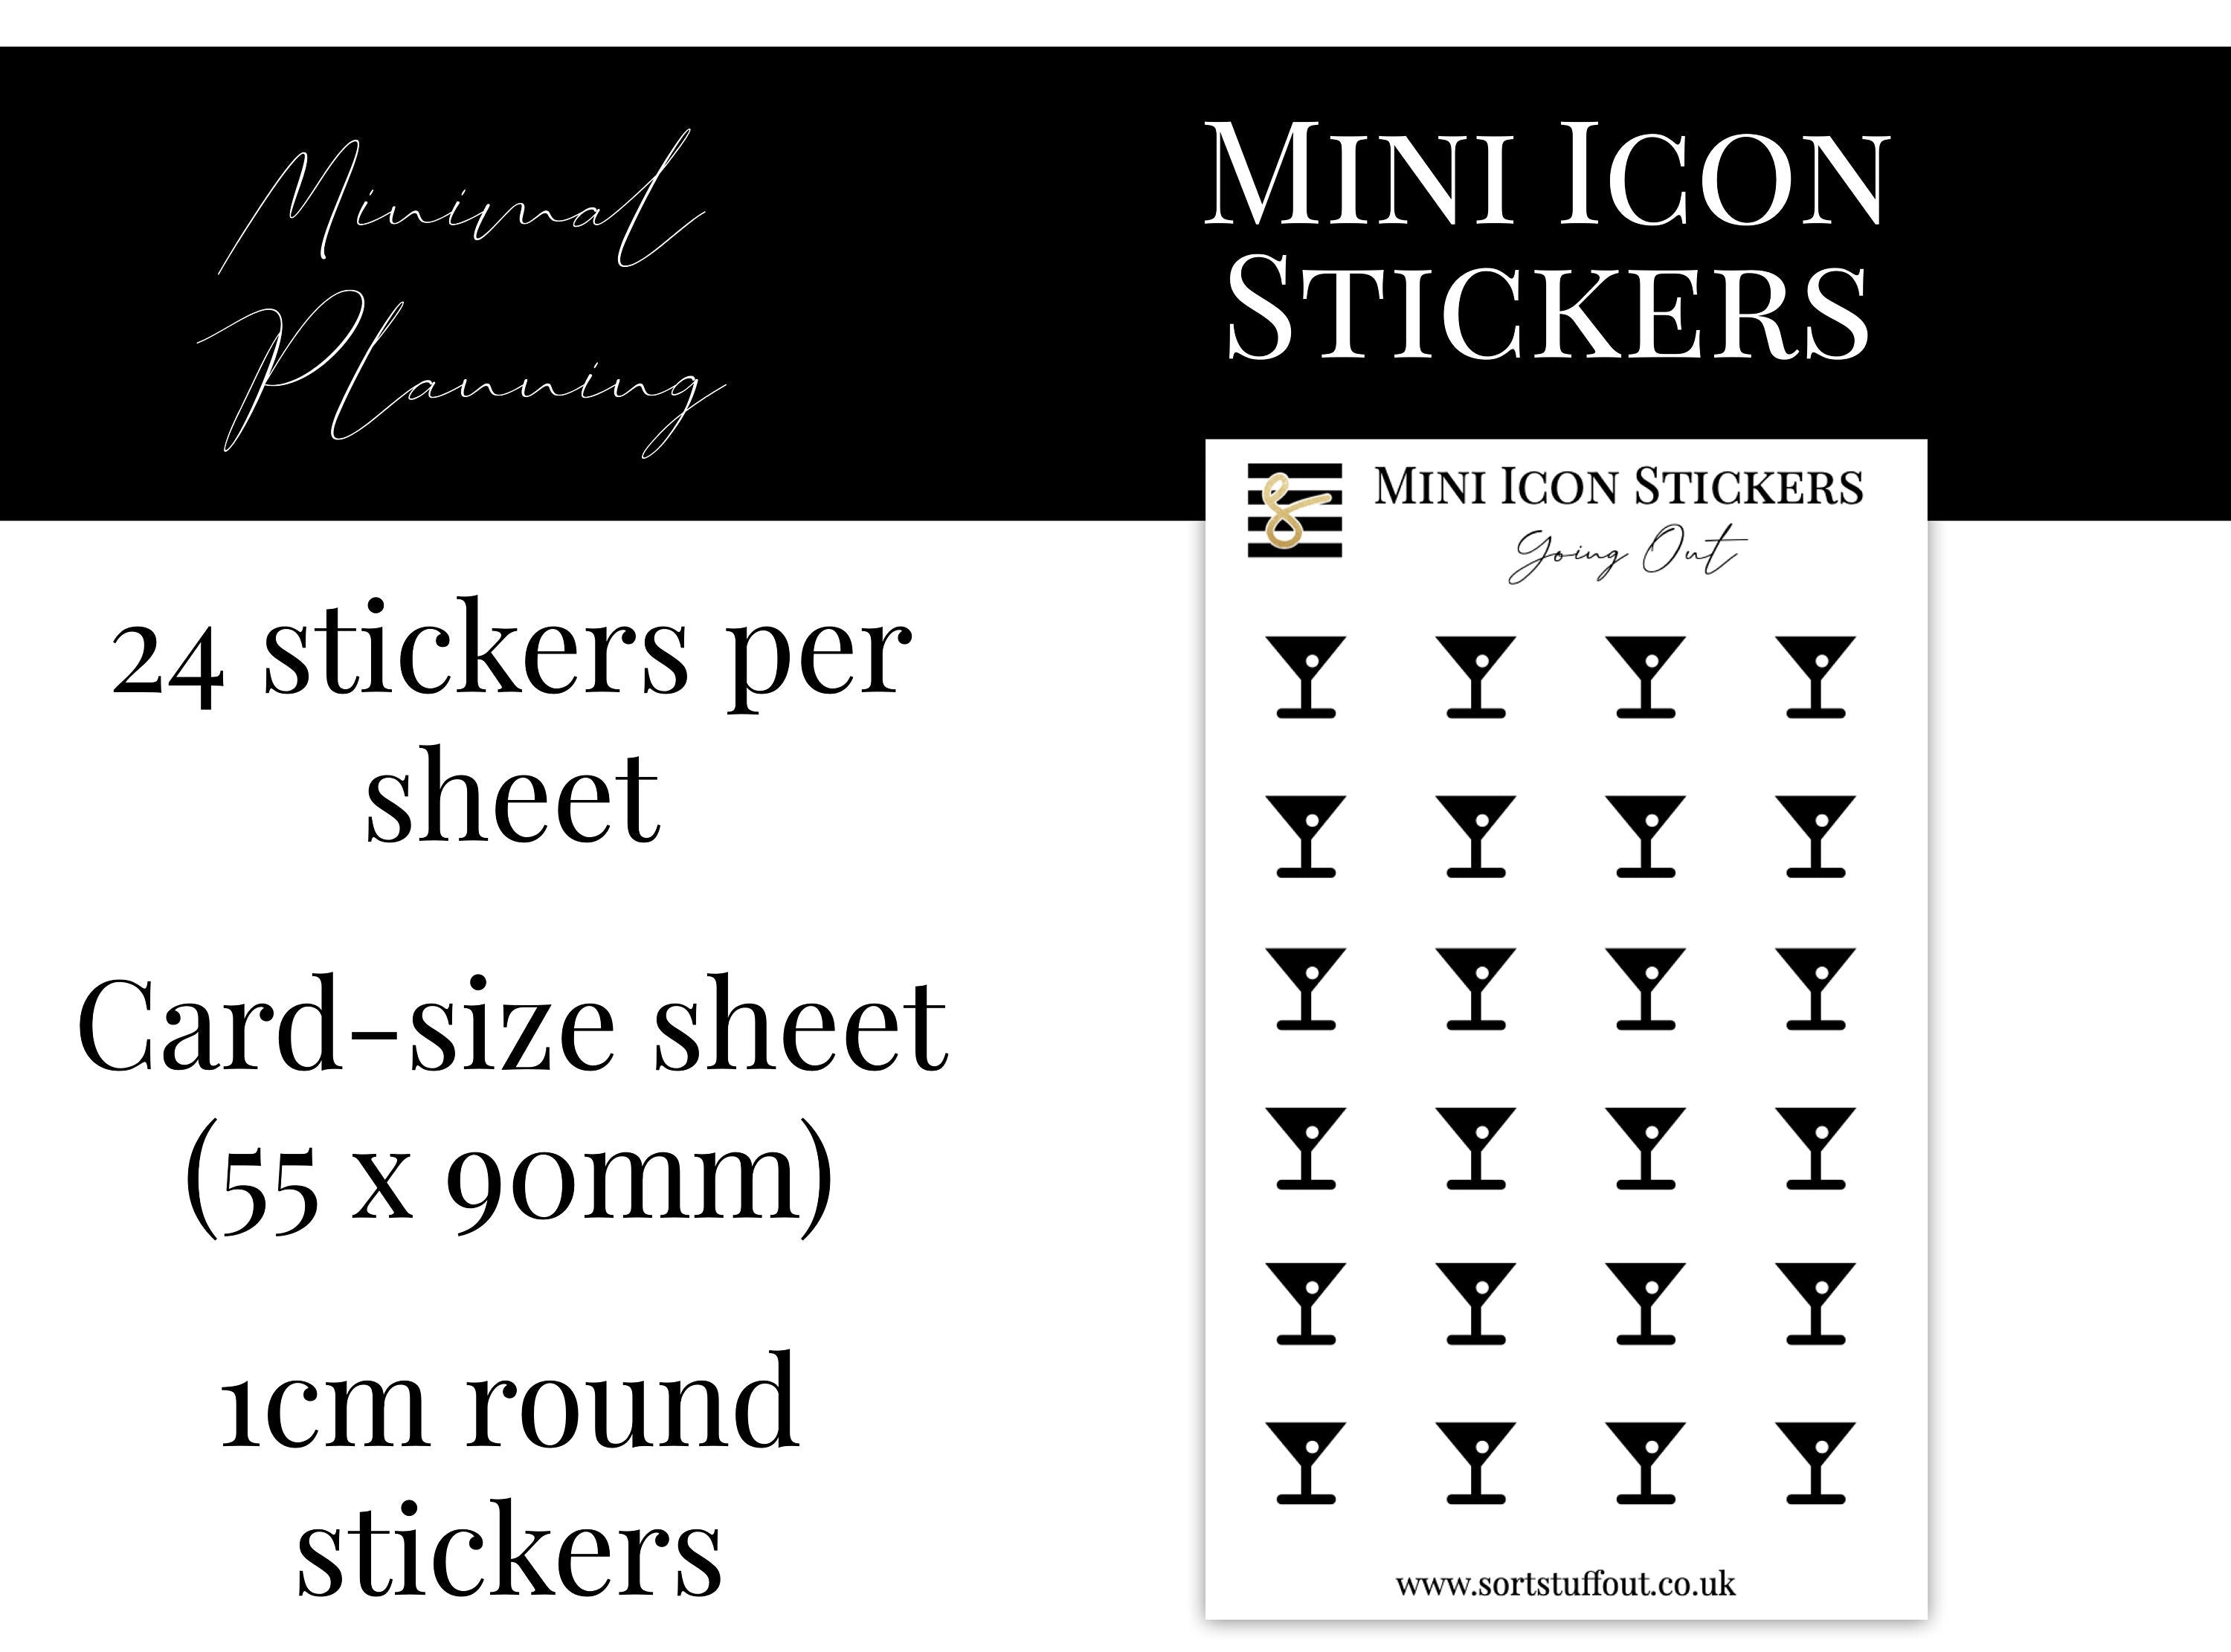 Mini Icon Stickers - Going Out